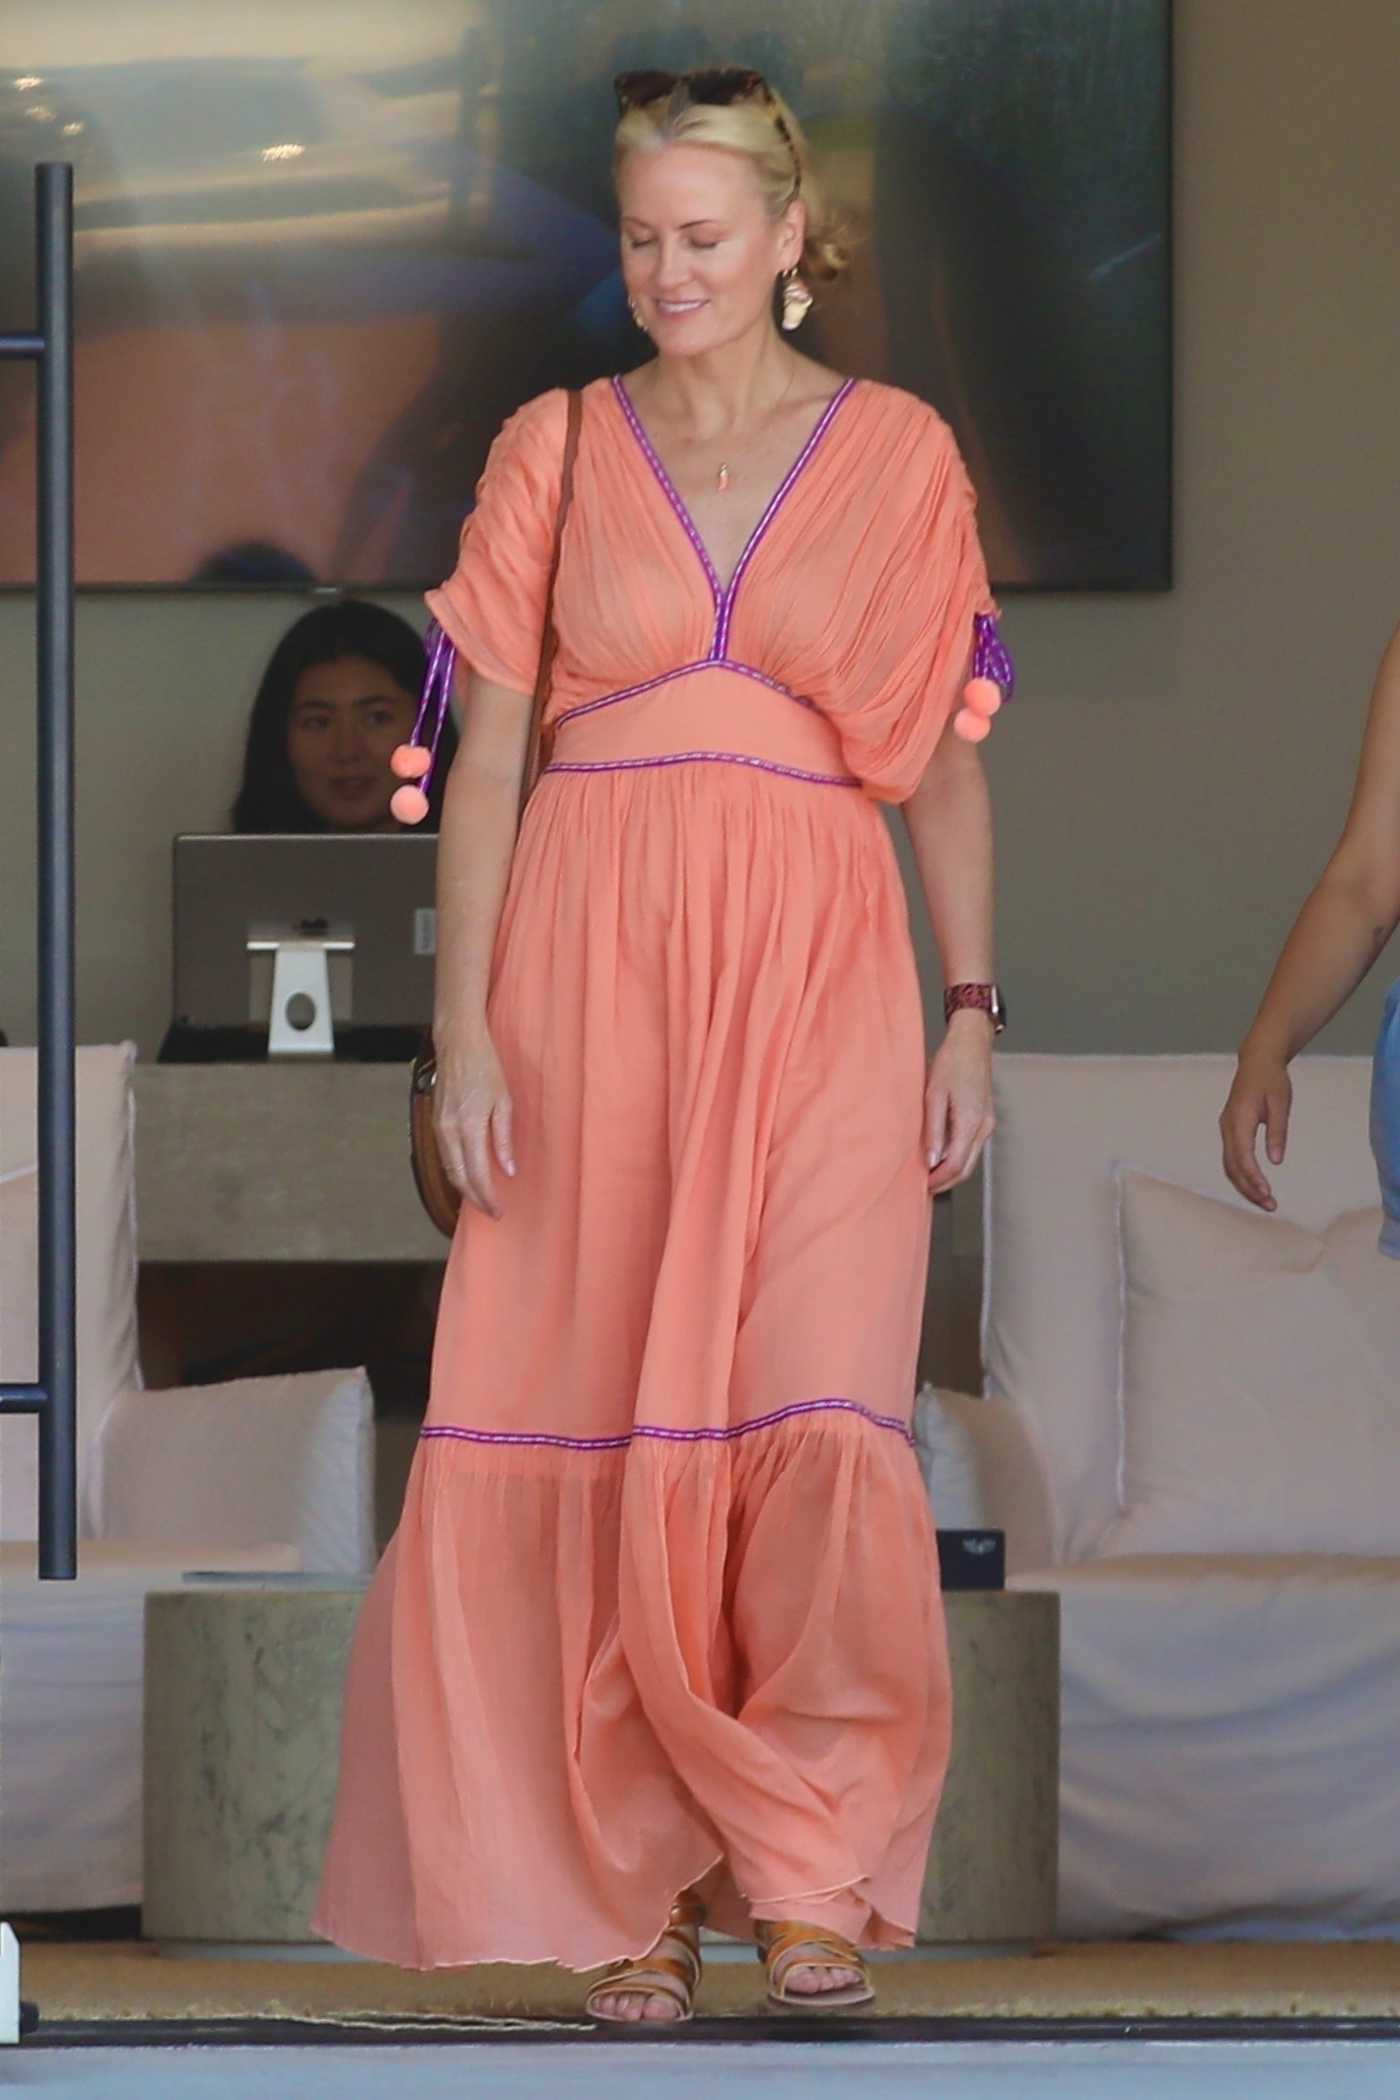 Laeticia Hallyday in a Full-Length Peach Sundress Was Seen Out in Malibu 06/23/2022